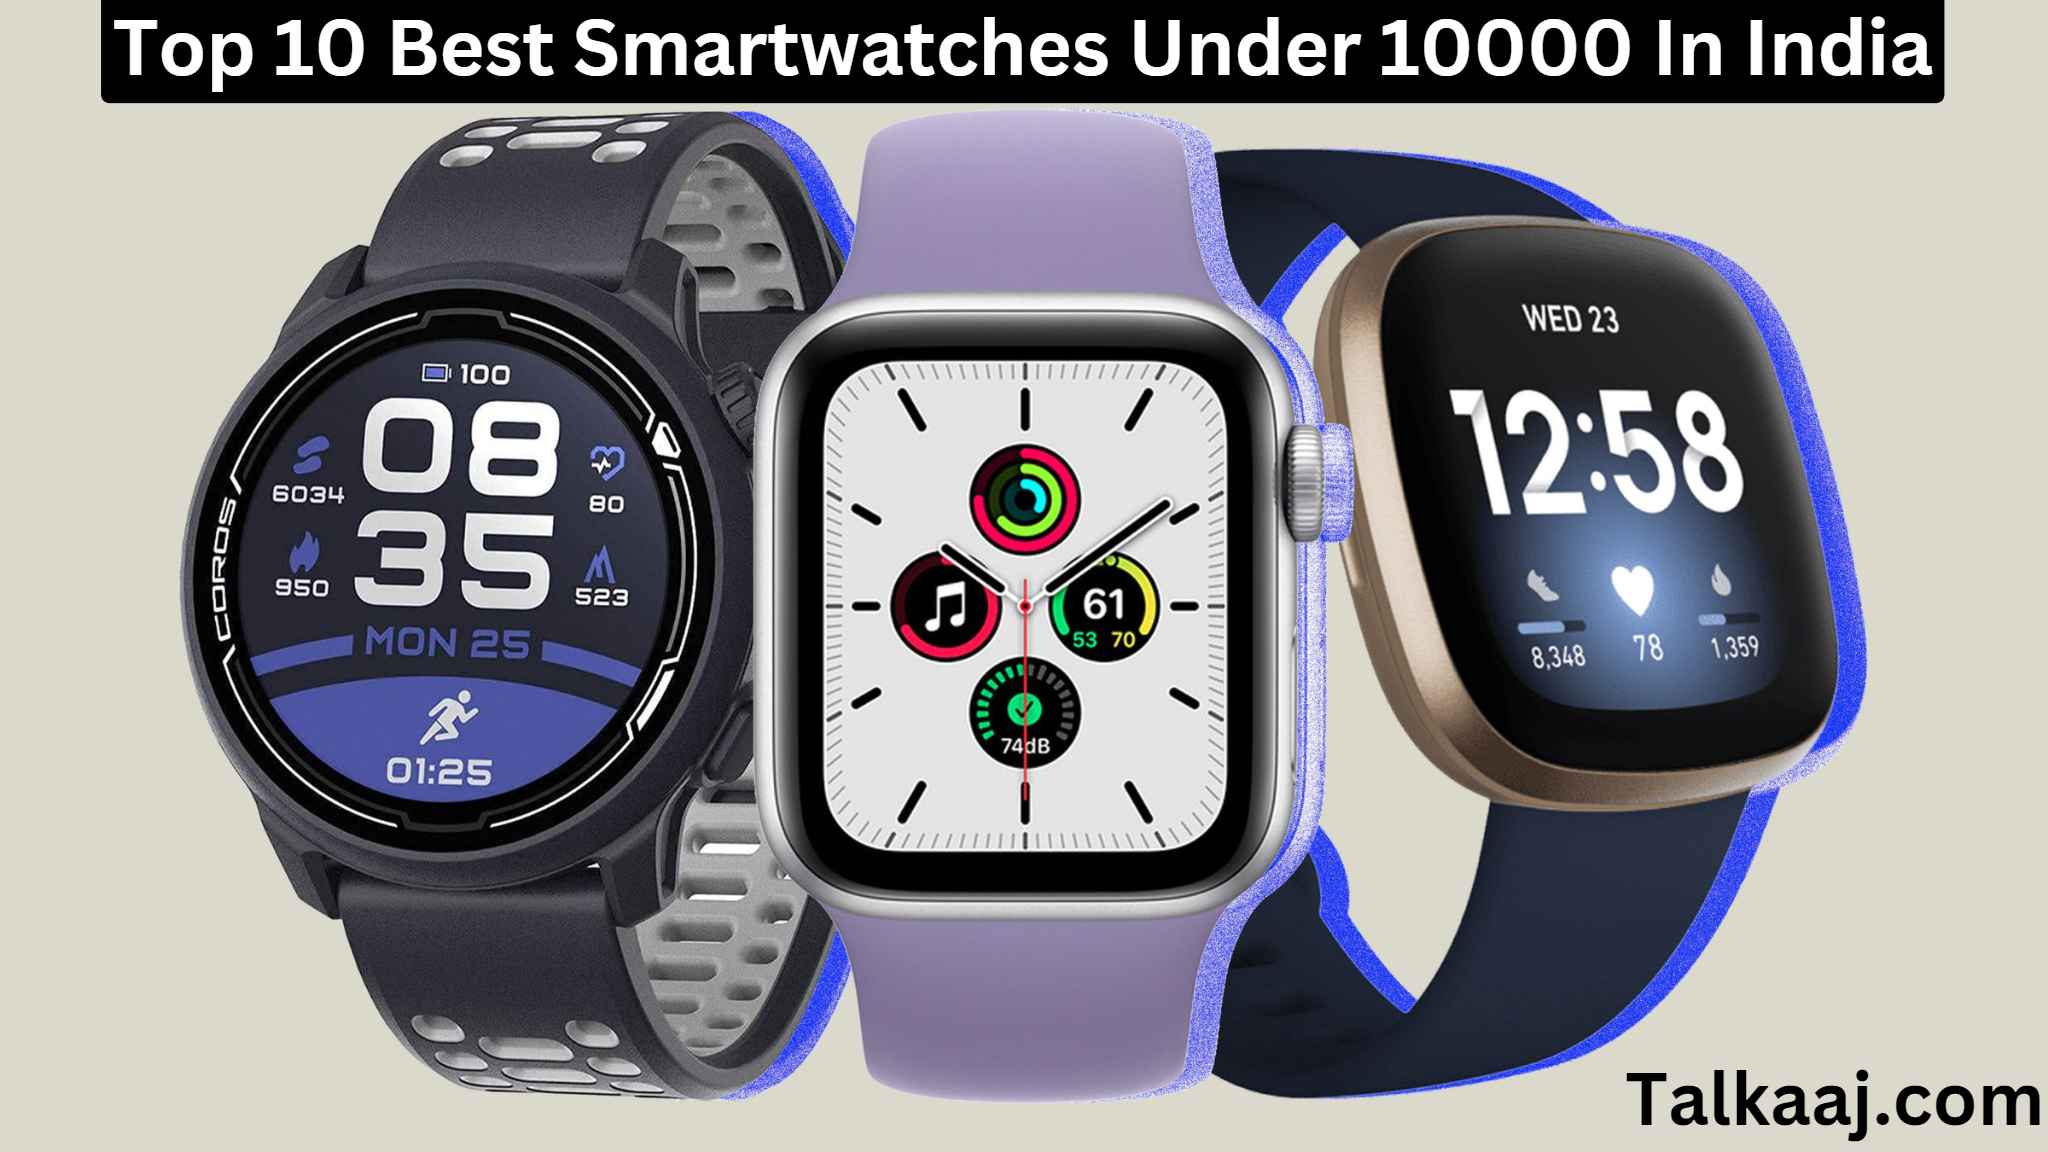 Top 10 Best Smartwatches Under 10000 In India - Buyer’s Guide Review